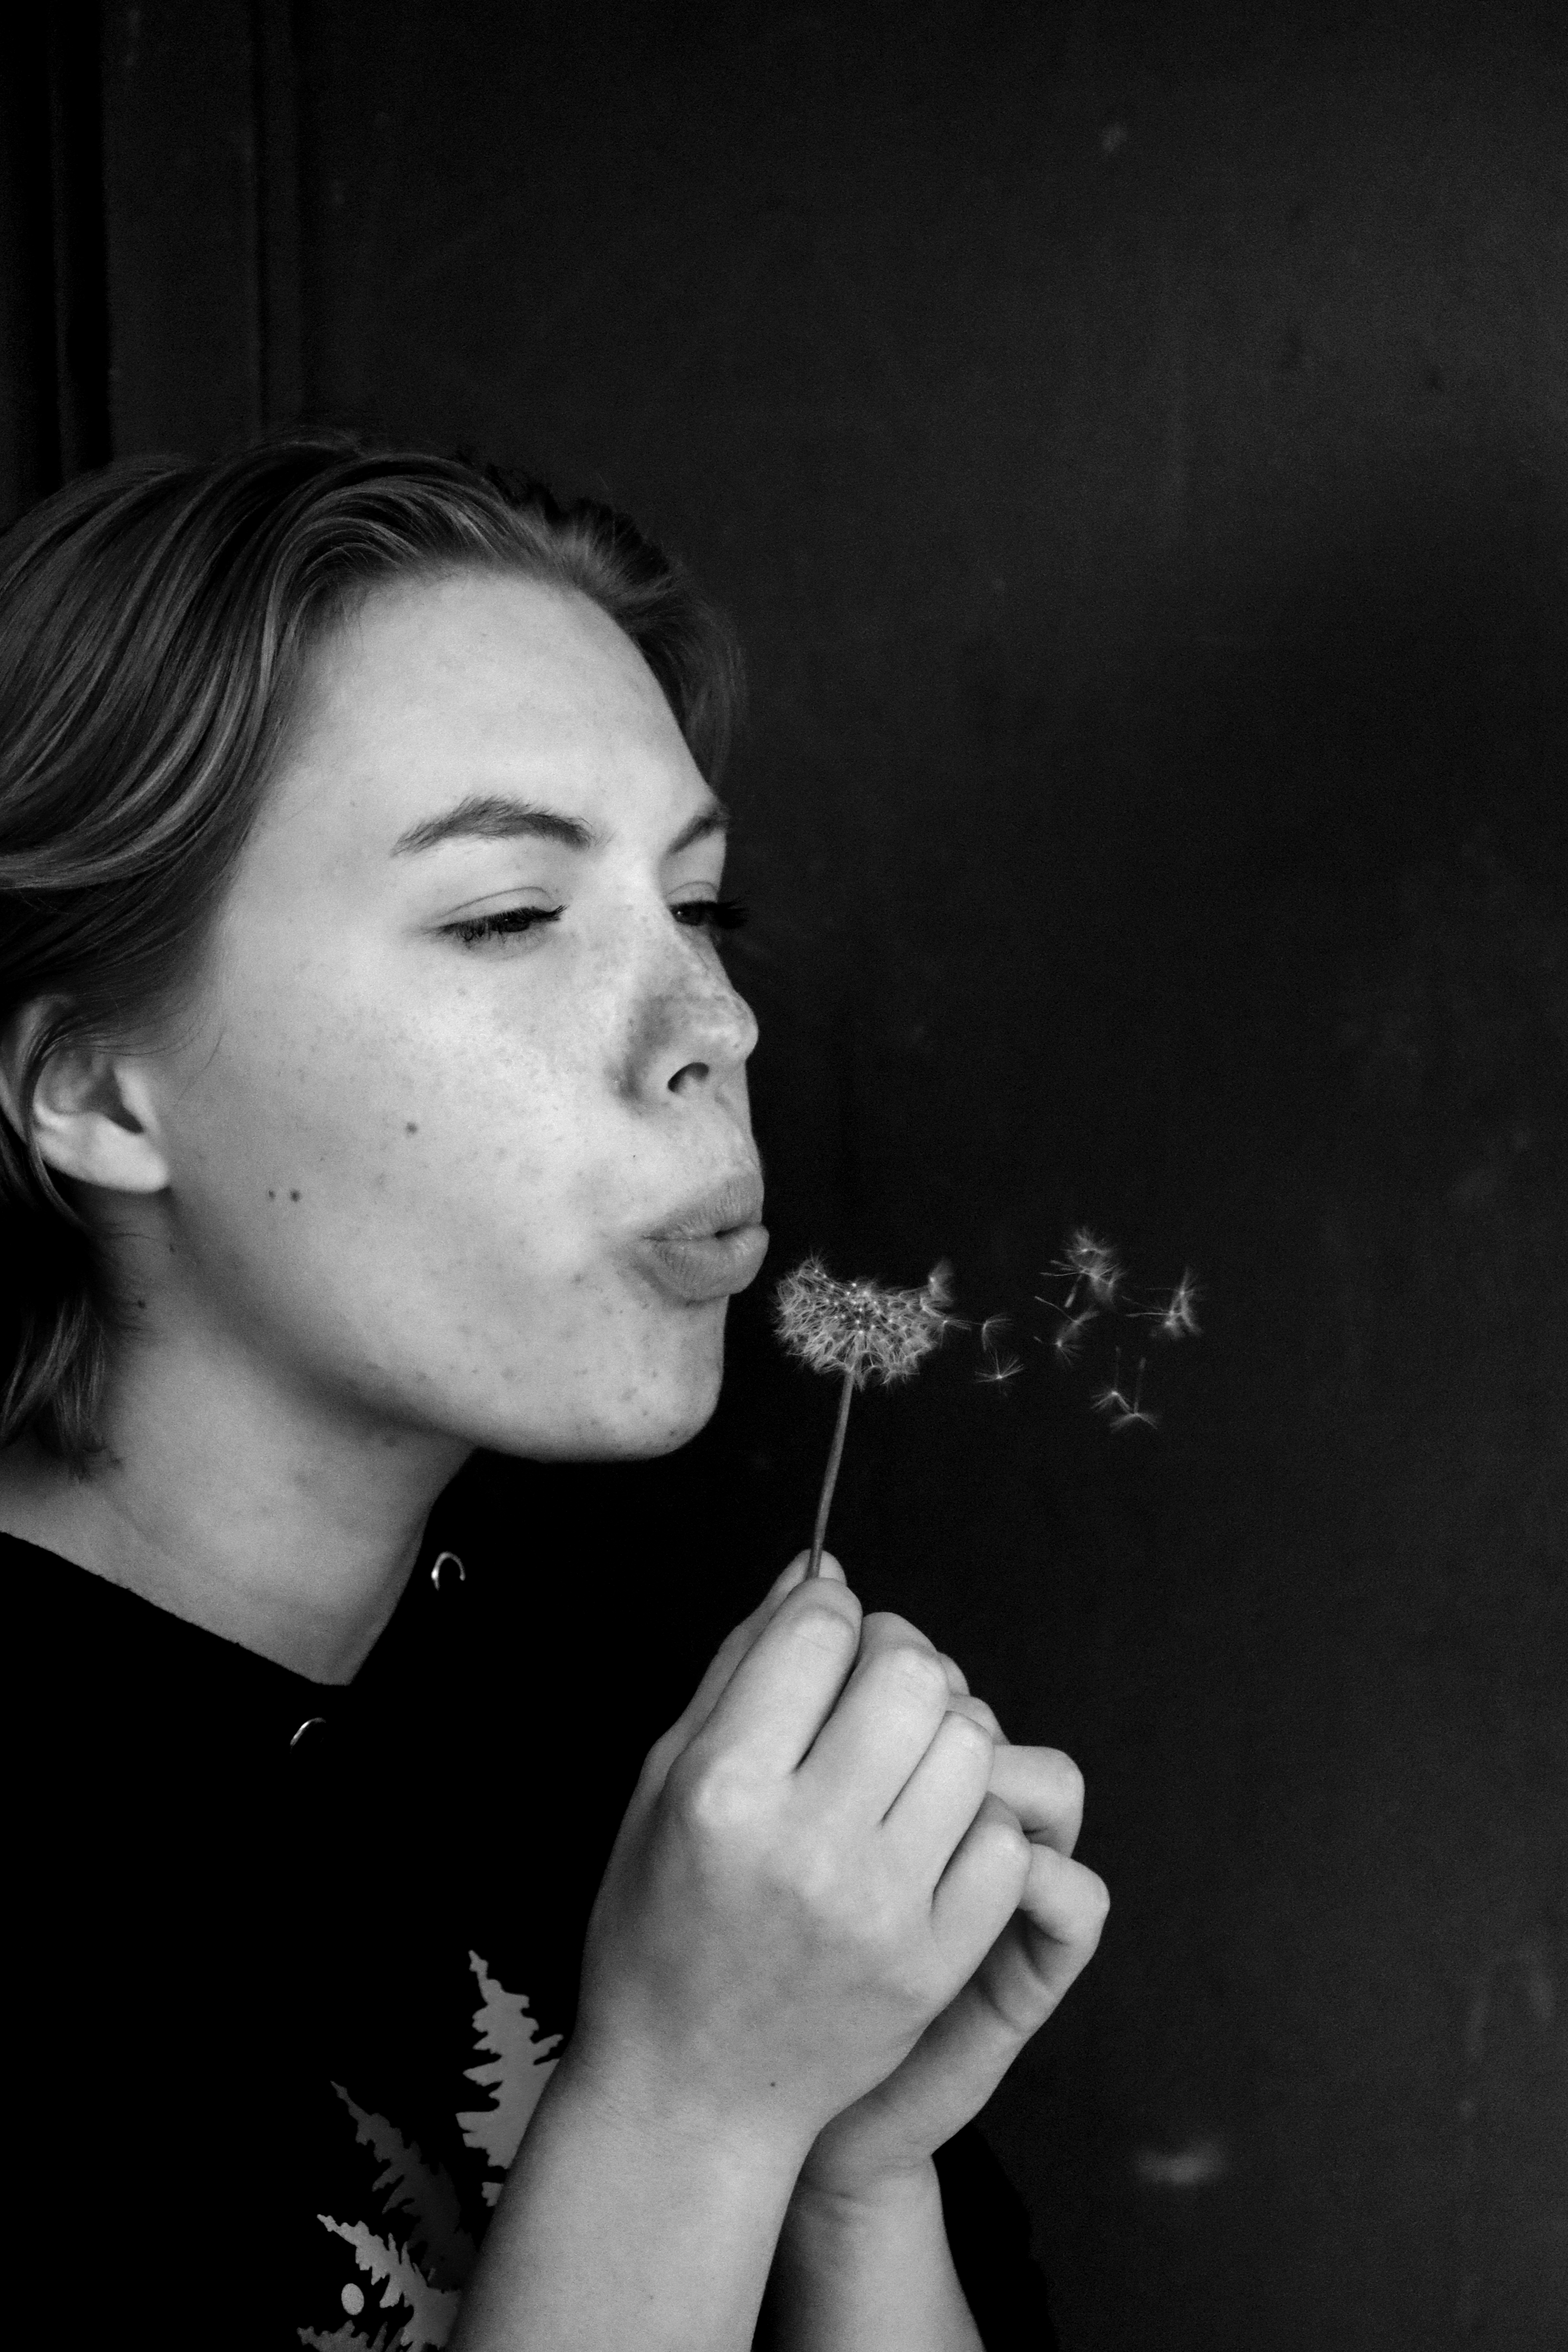 black and white photo of woman blowing dandelion fluff